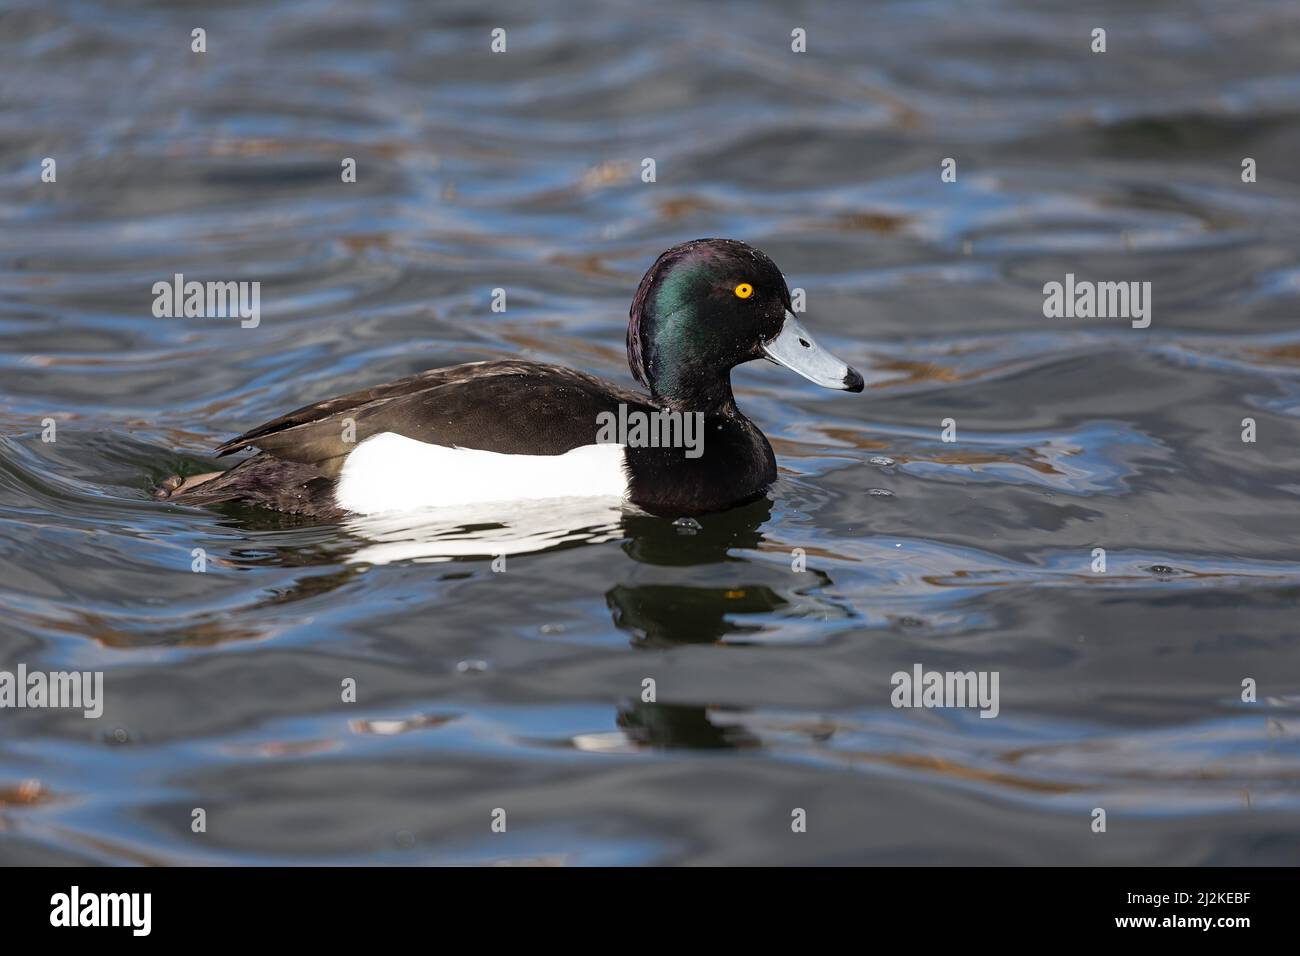 Swimming adult male Tufted Duck (Aythya fuligula) at a lake. Stock Photo